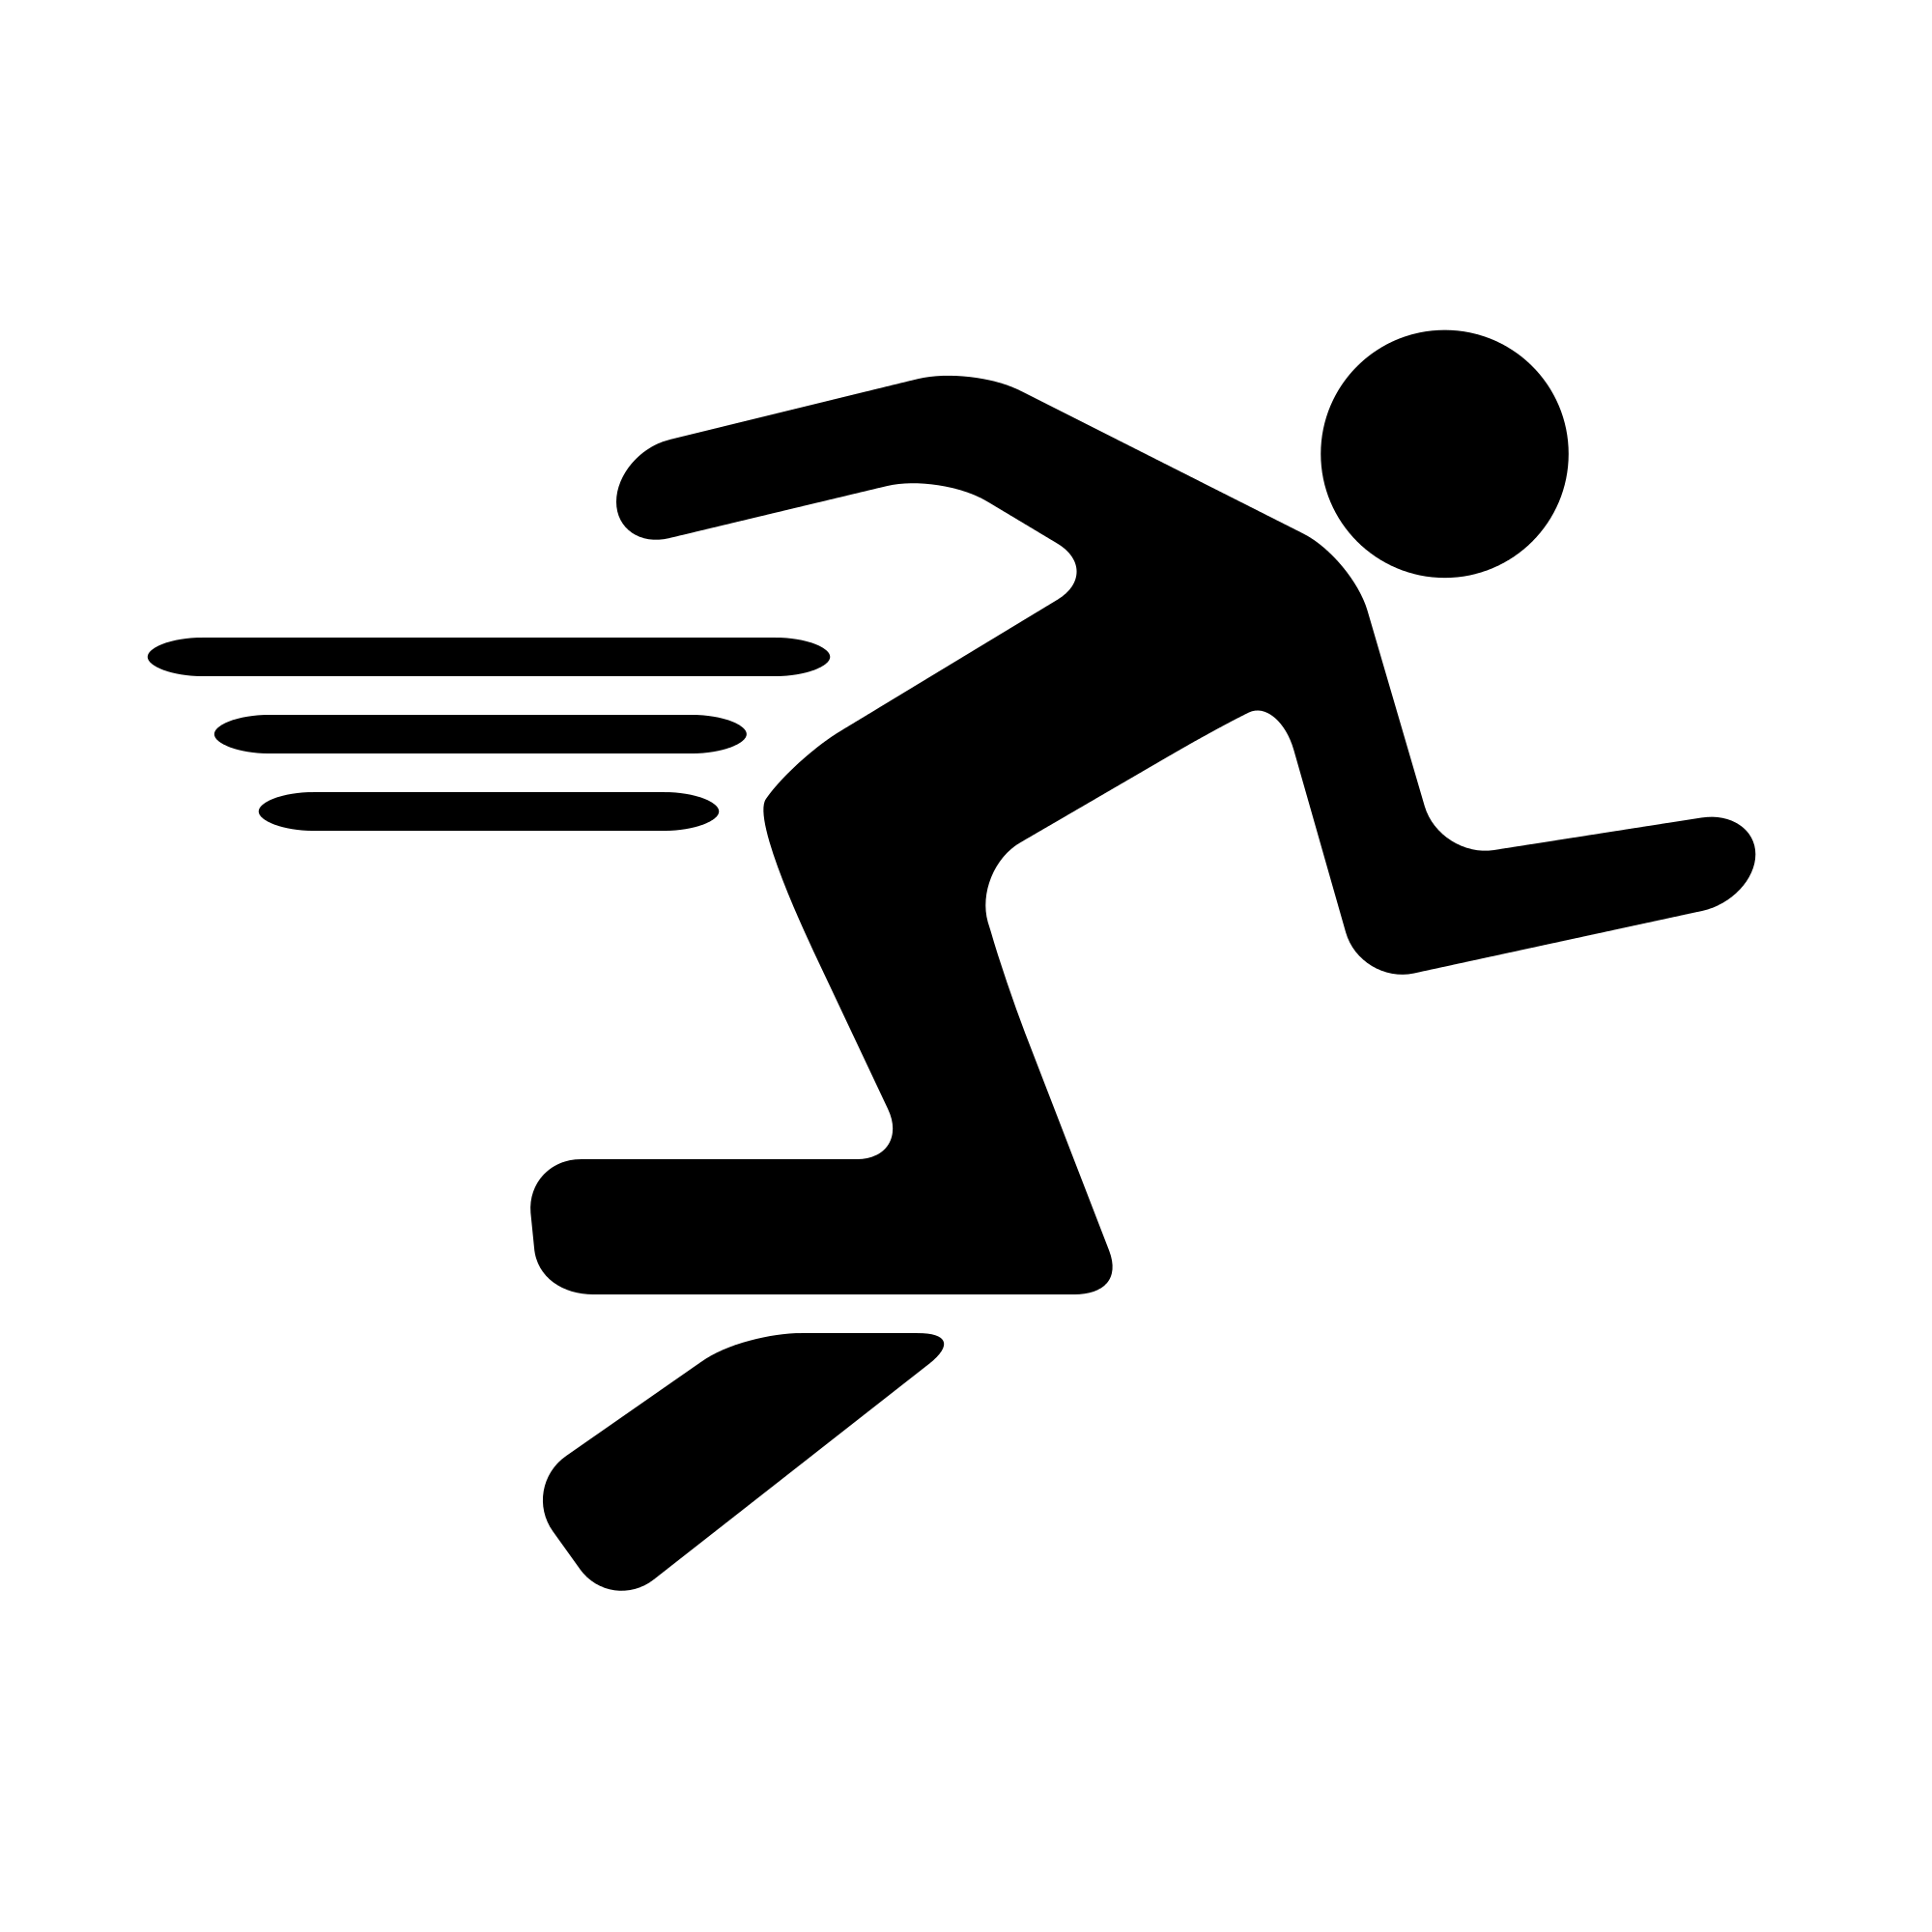 2000px-Running_icon_-_Noun_Project_17825.svg